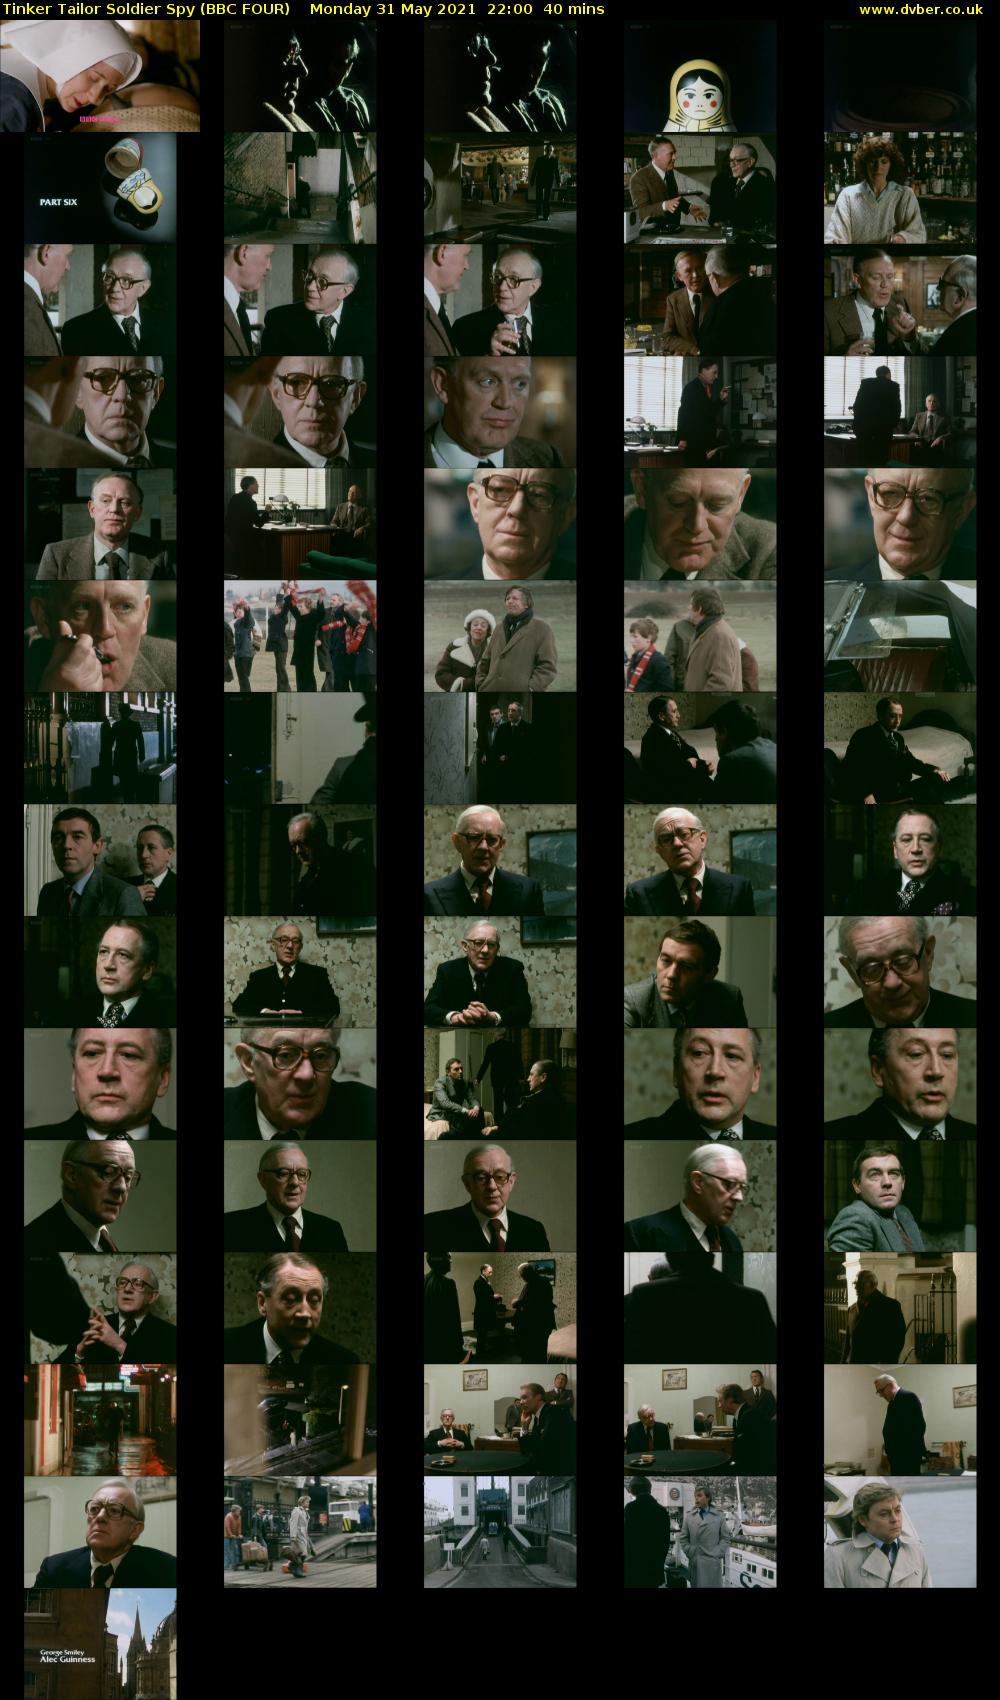 Tinker Tailor Soldier Spy (BBC FOUR) Monday 31 May 2021 22:00 - 22:40